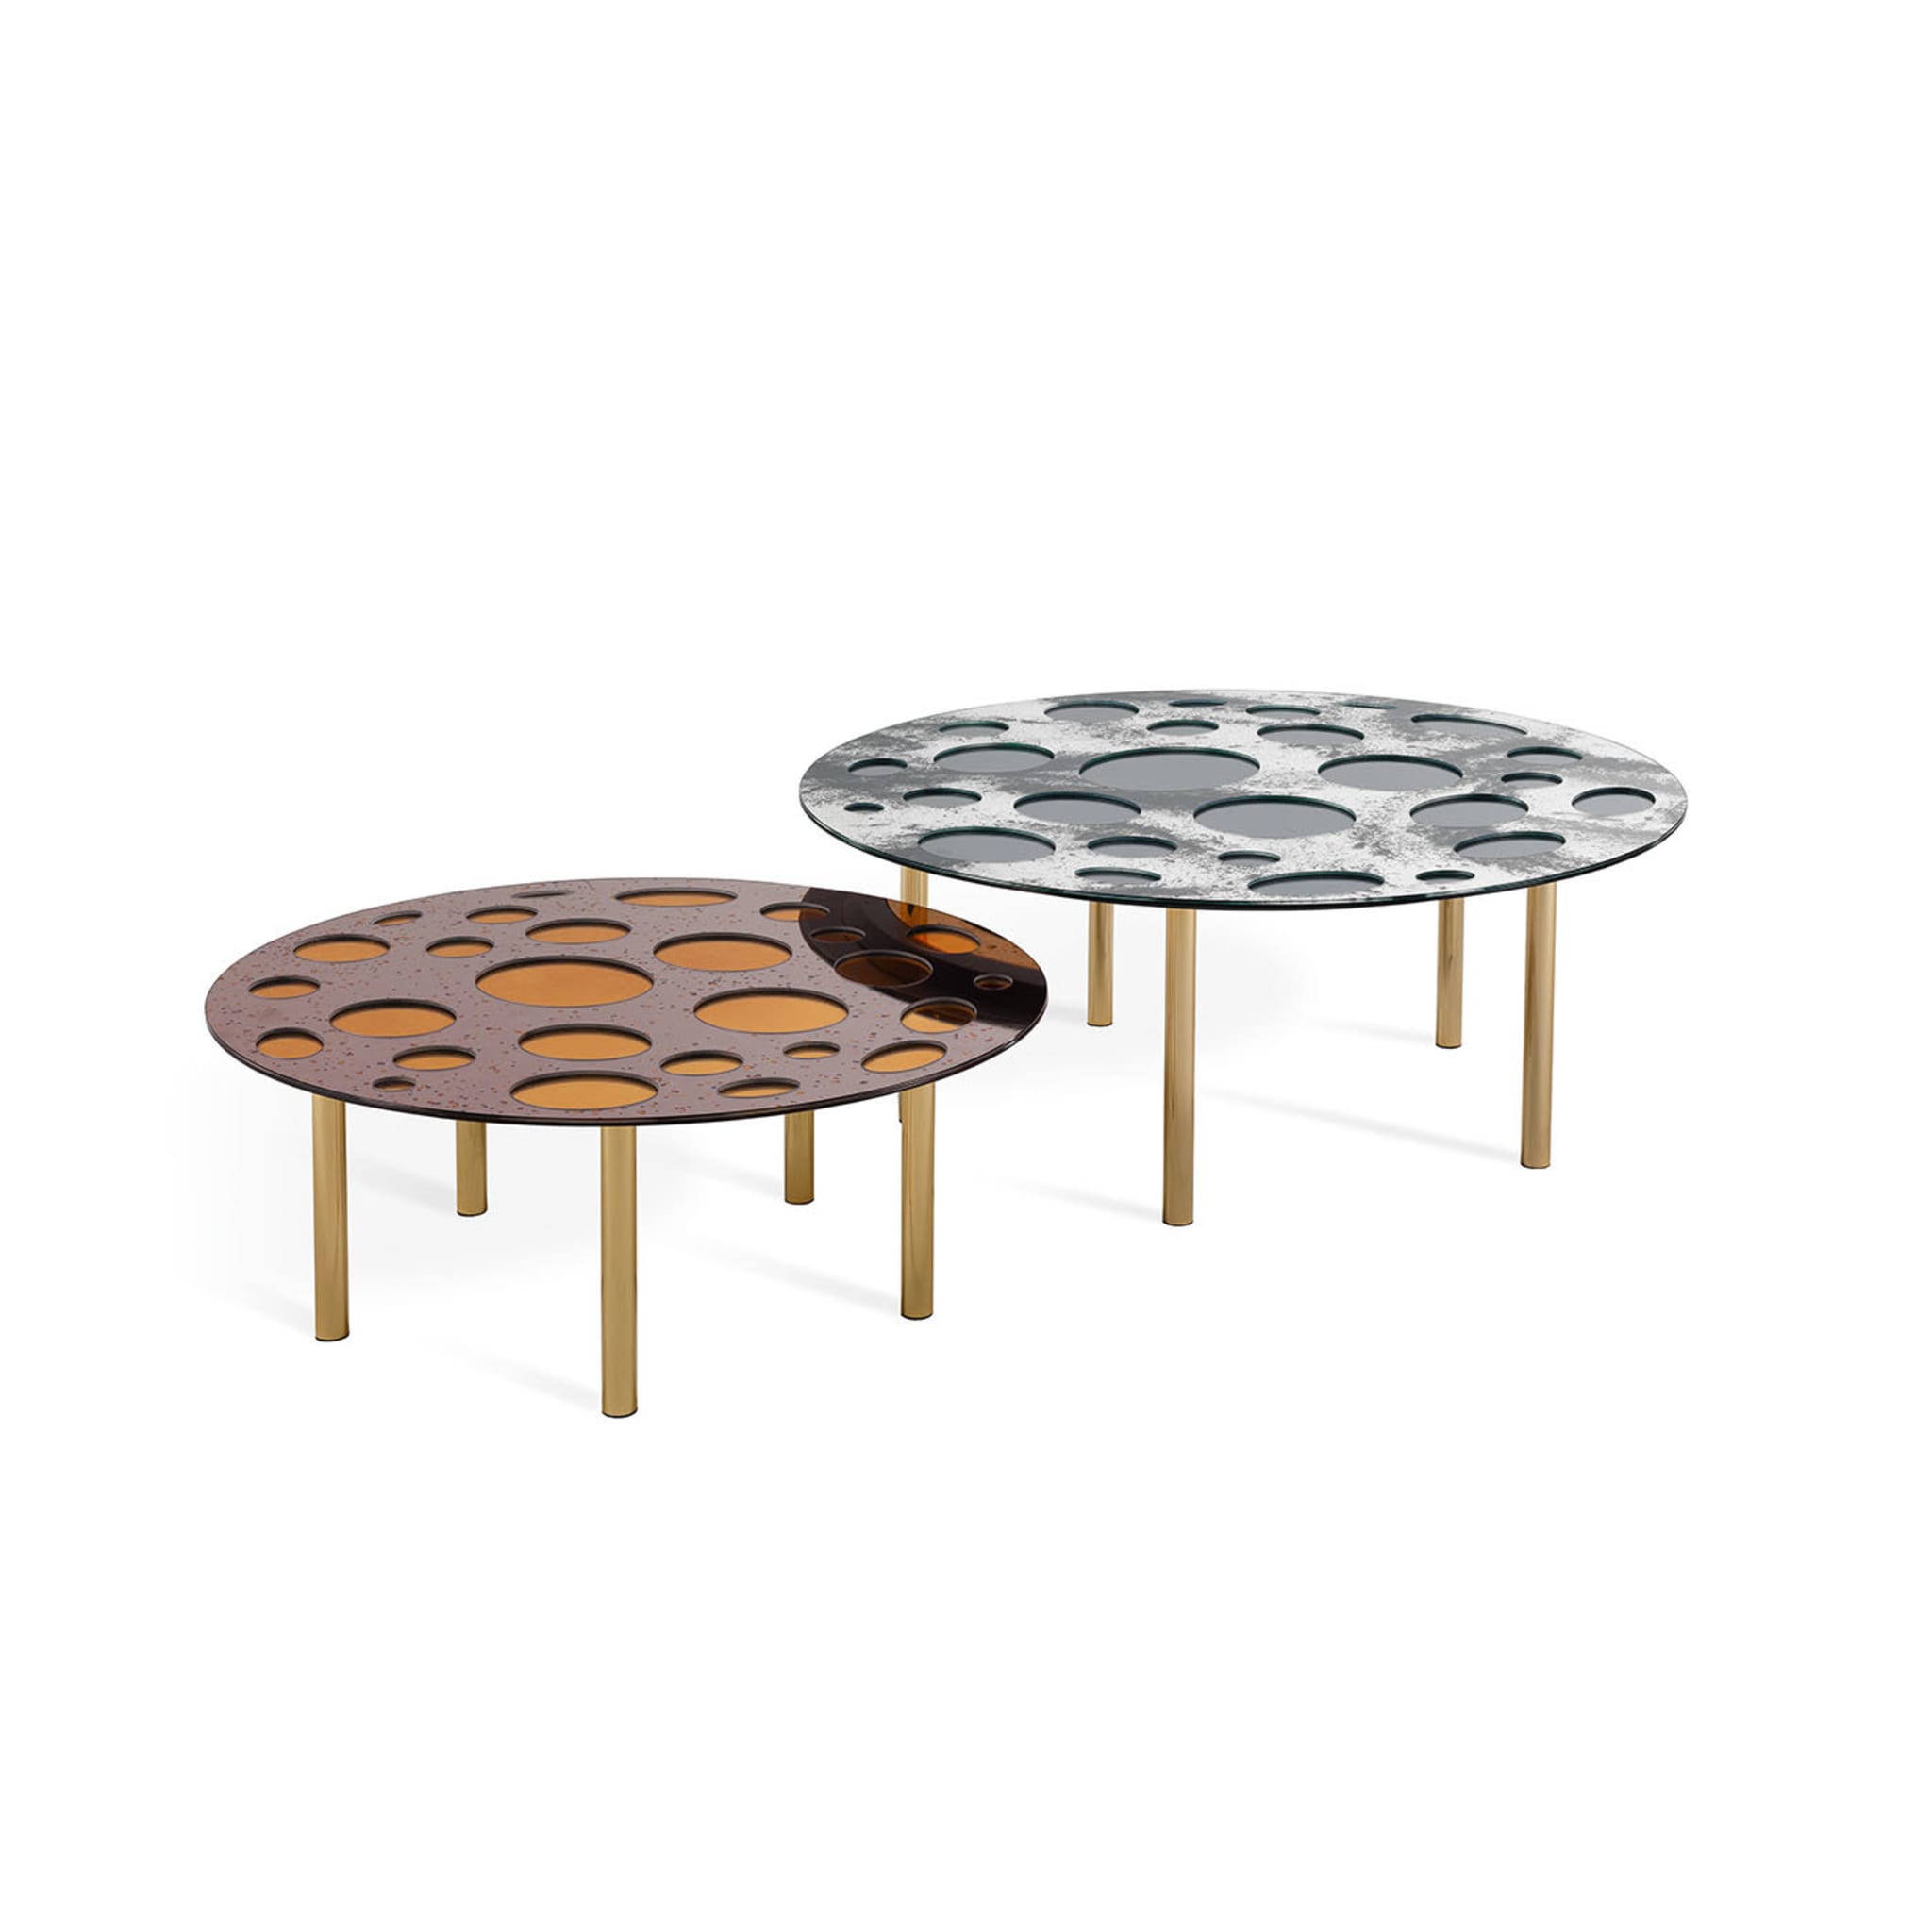 Venny Large Central Table by Matteo Cibic - Alternative view 1